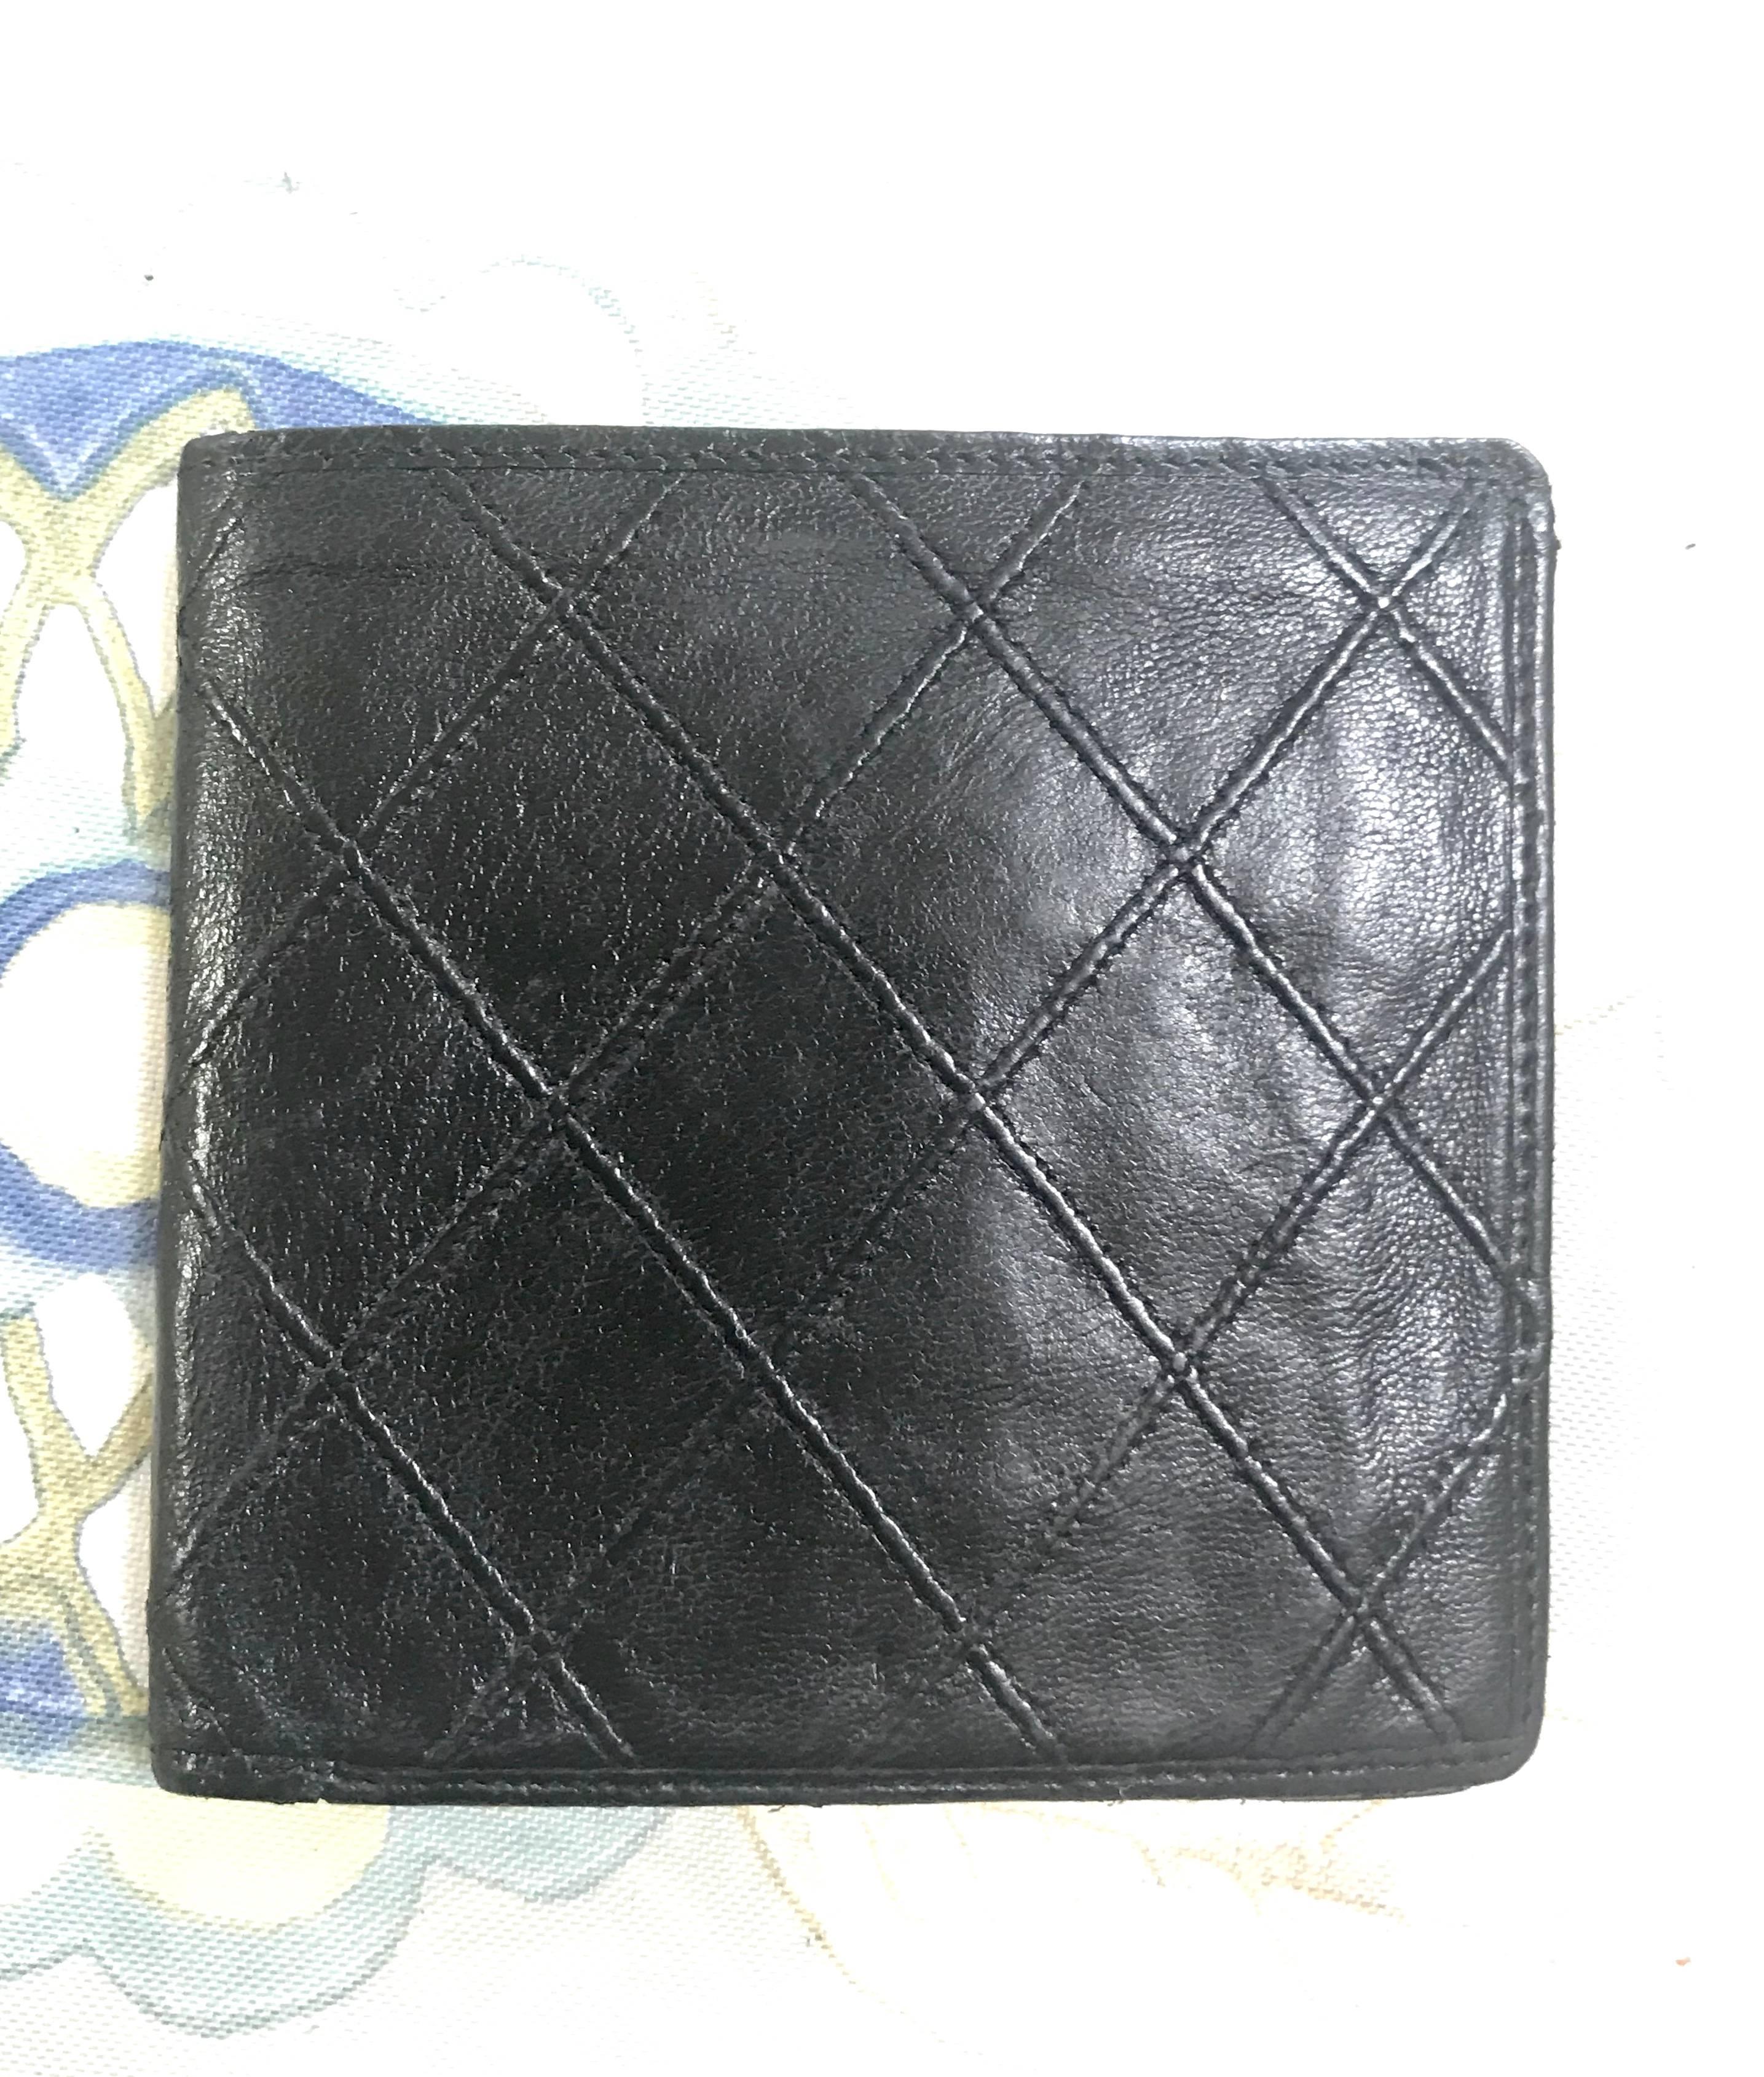 1980's vintage CHANEL black calfskin square stitched wallet, bill, card case. Unisex purse.

Introducing a CHANEL vintage classic and simple design wallet/bill & card case in nice and soft black calf leather from 80's. 
Unisex and classic wallet for